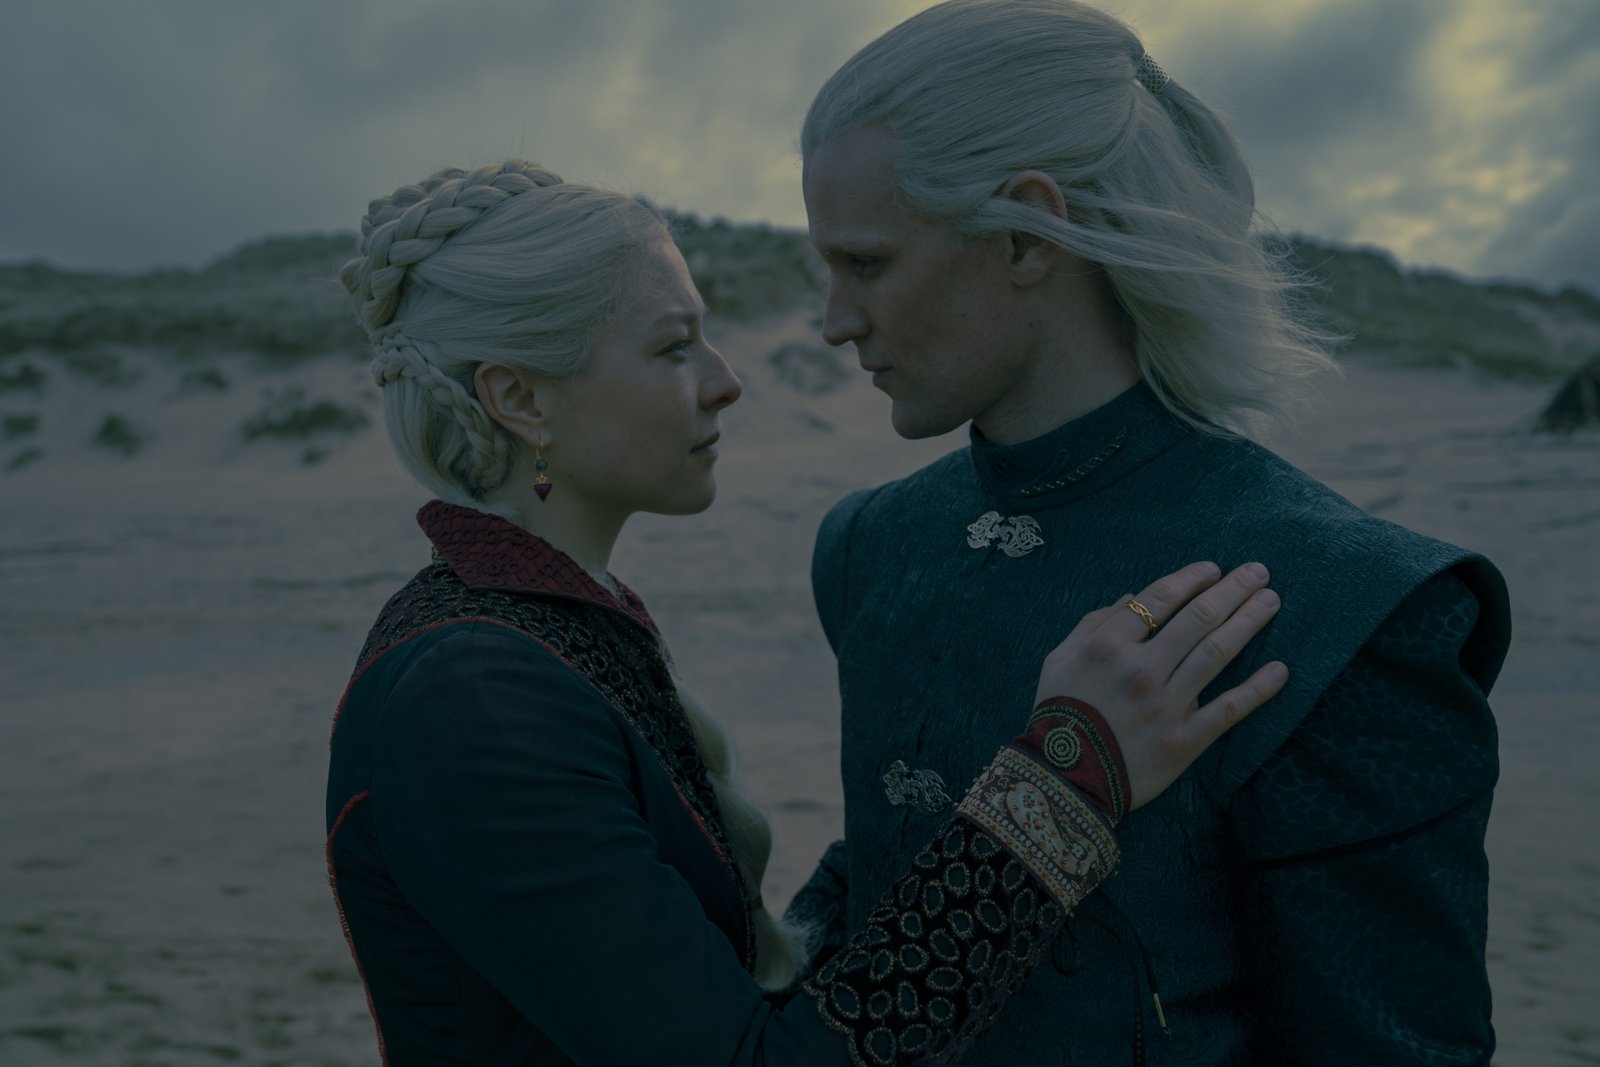 Emma D'Arcy and Matt Smith as Rhaenyra and Daemon Targaryen in 'House of the Dragon' for our article about episode 8's release date. The pair are about to kiss, and Rhaenyra is resting her hand on his chest. The sun is setting behind them.